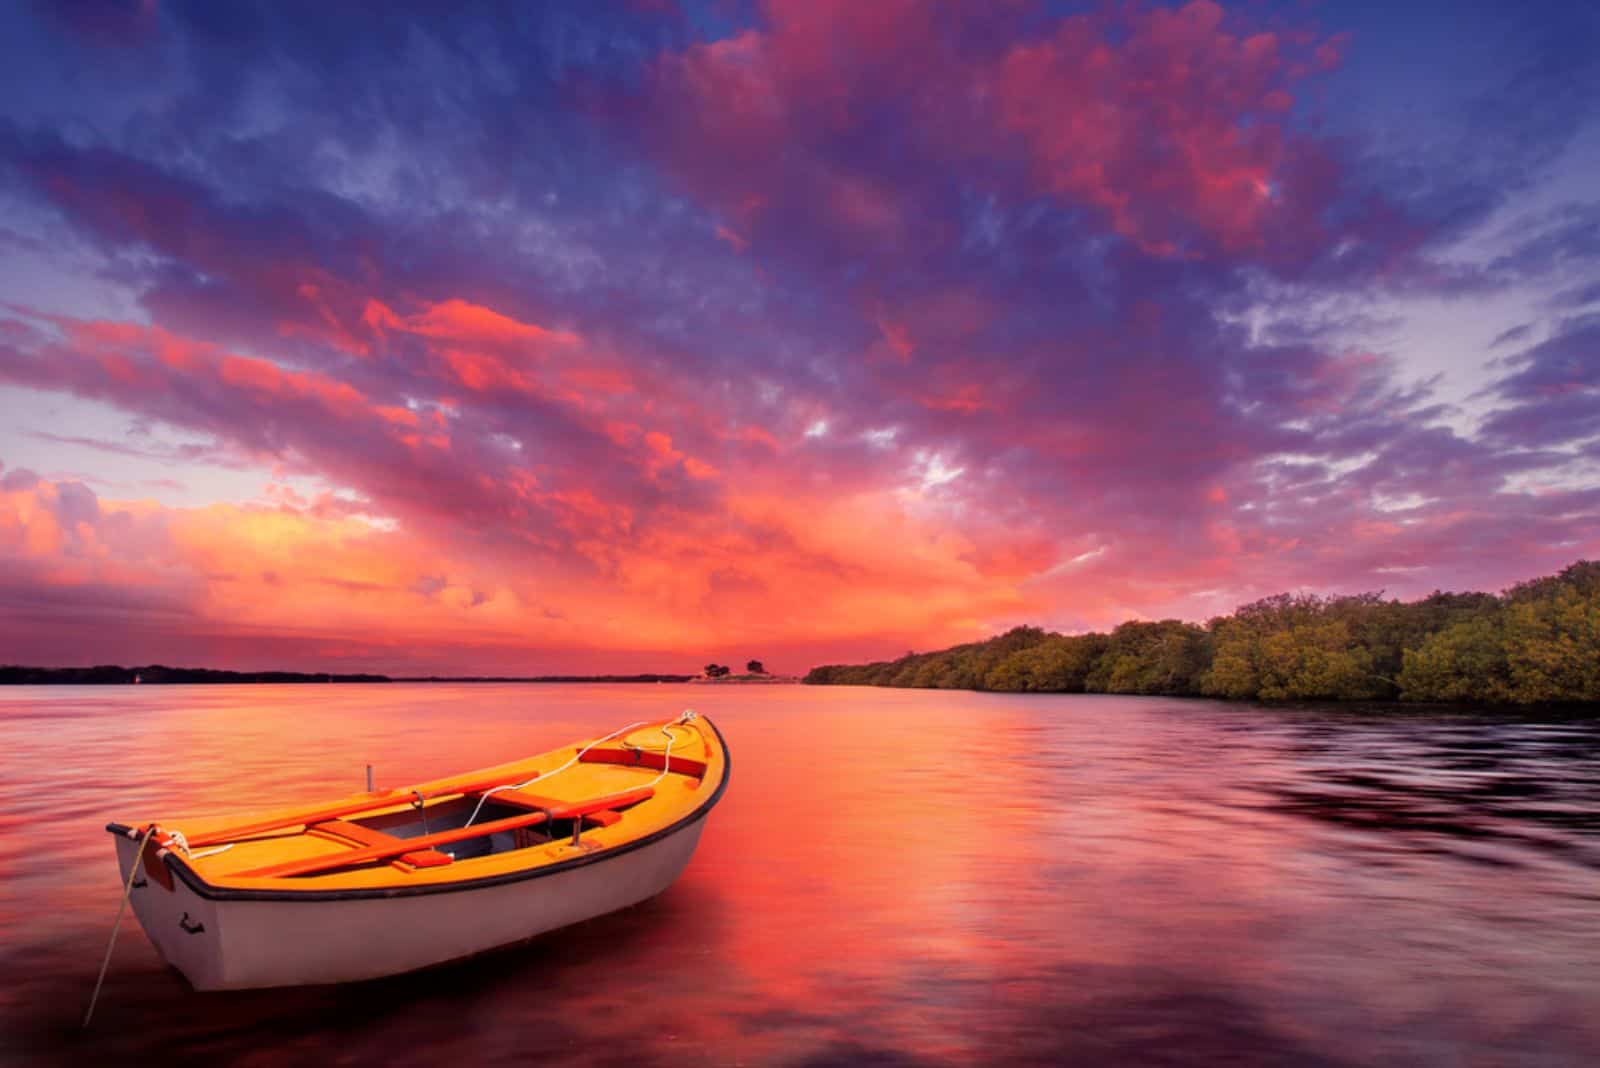 A rowboat watches an amazing sunset